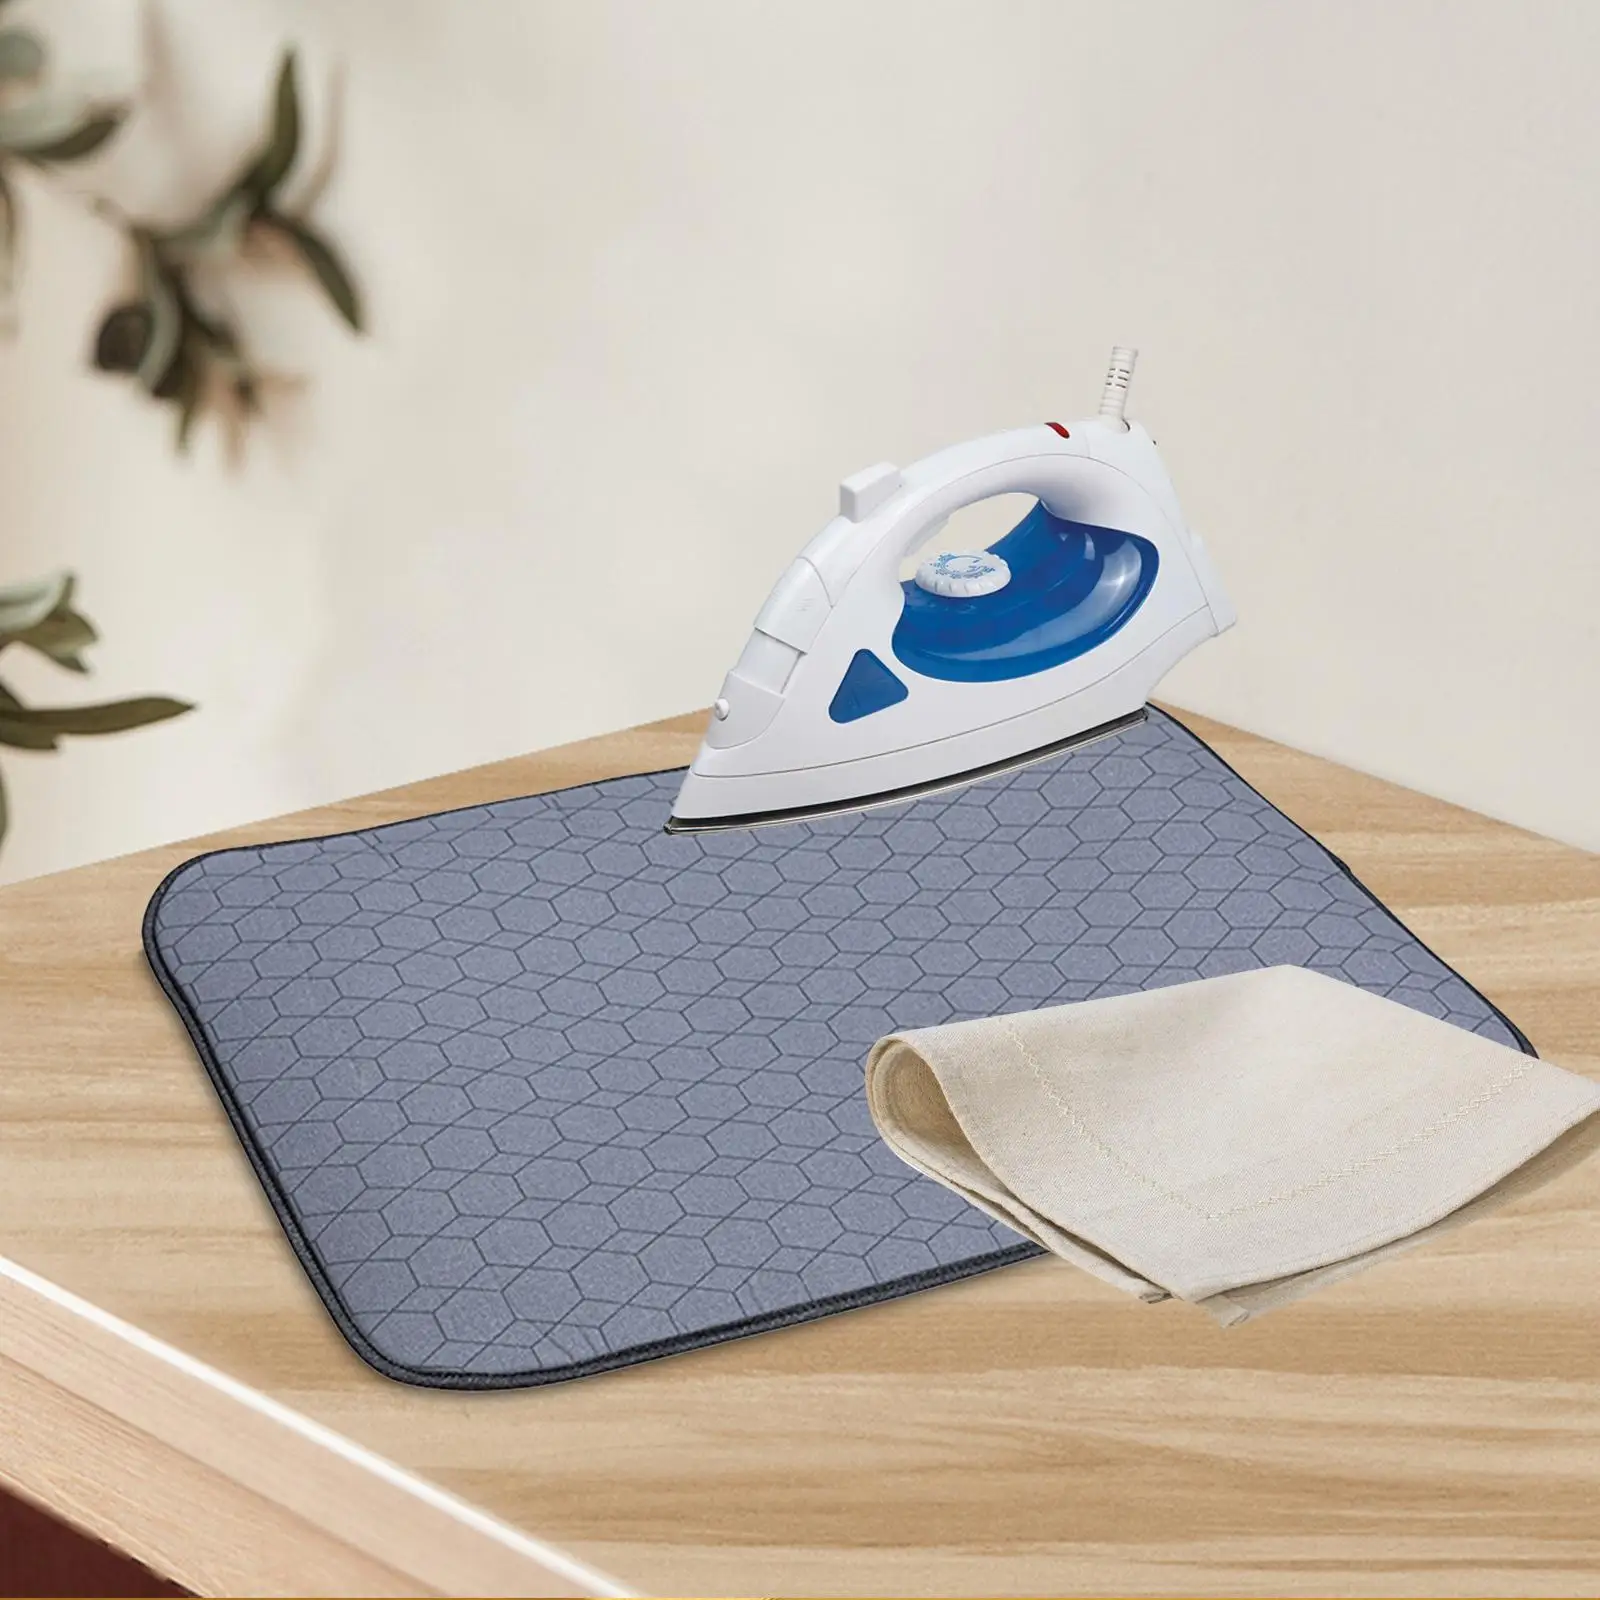 Ironing Mat Convenient Portable Tabletop Iron Board Sleeve Rack Ironing Board for Sewing Room Apartment Dorm Household Clothes